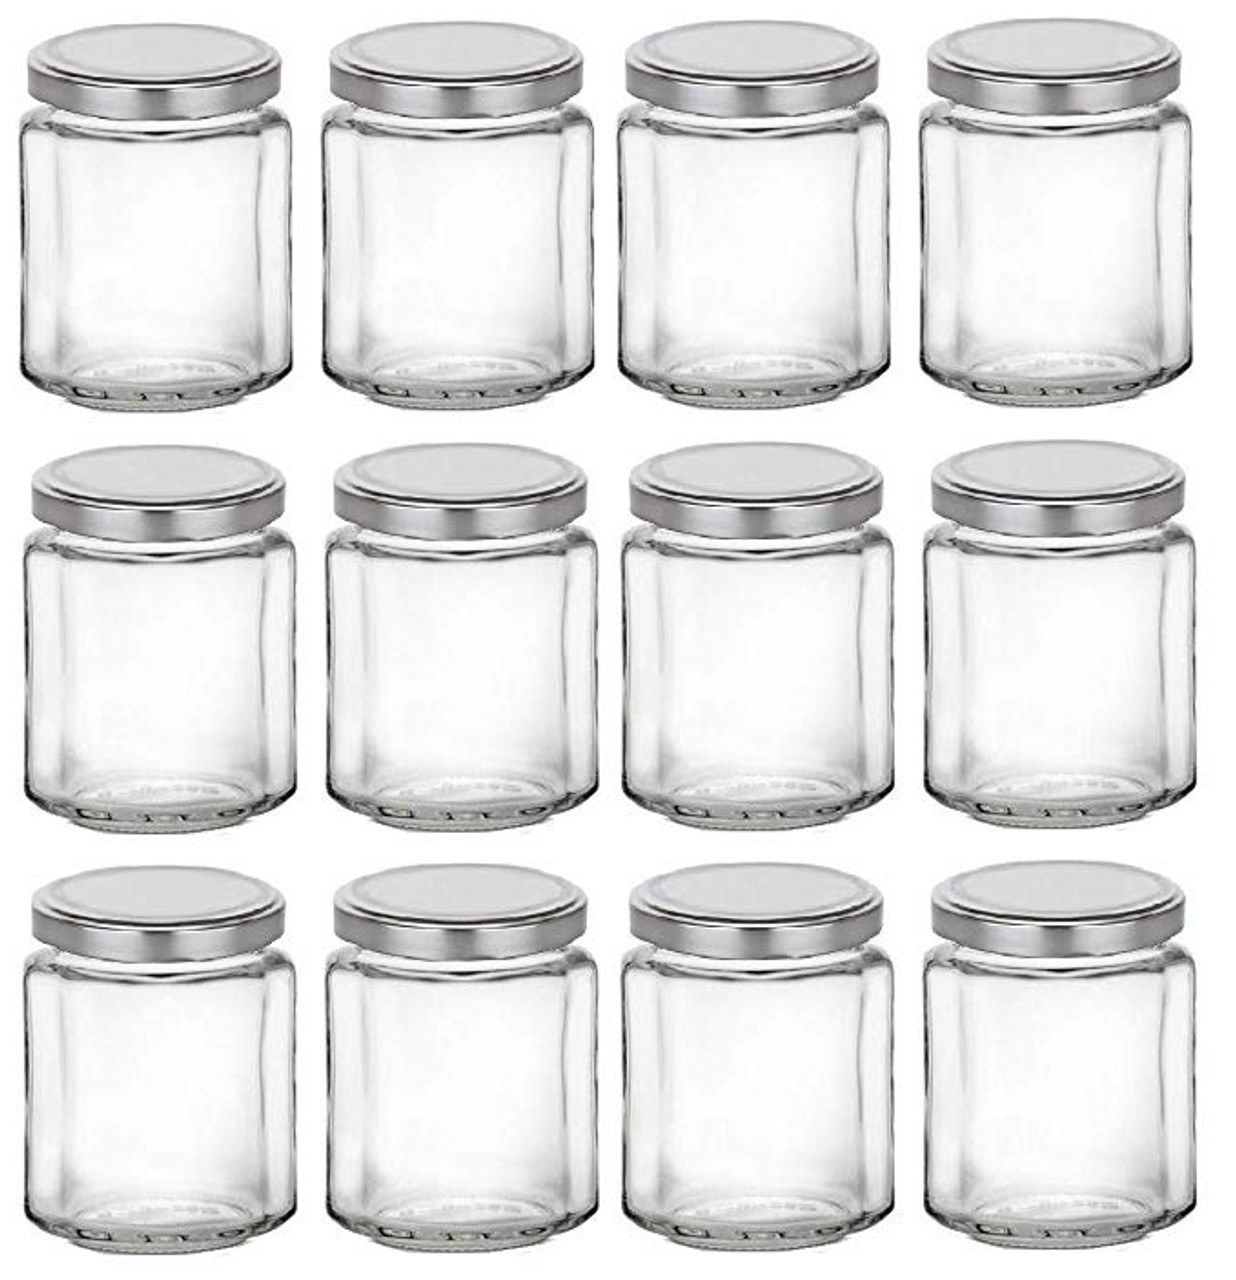 6 oz Victorian Square Glass Jar with Lid (190 ml)